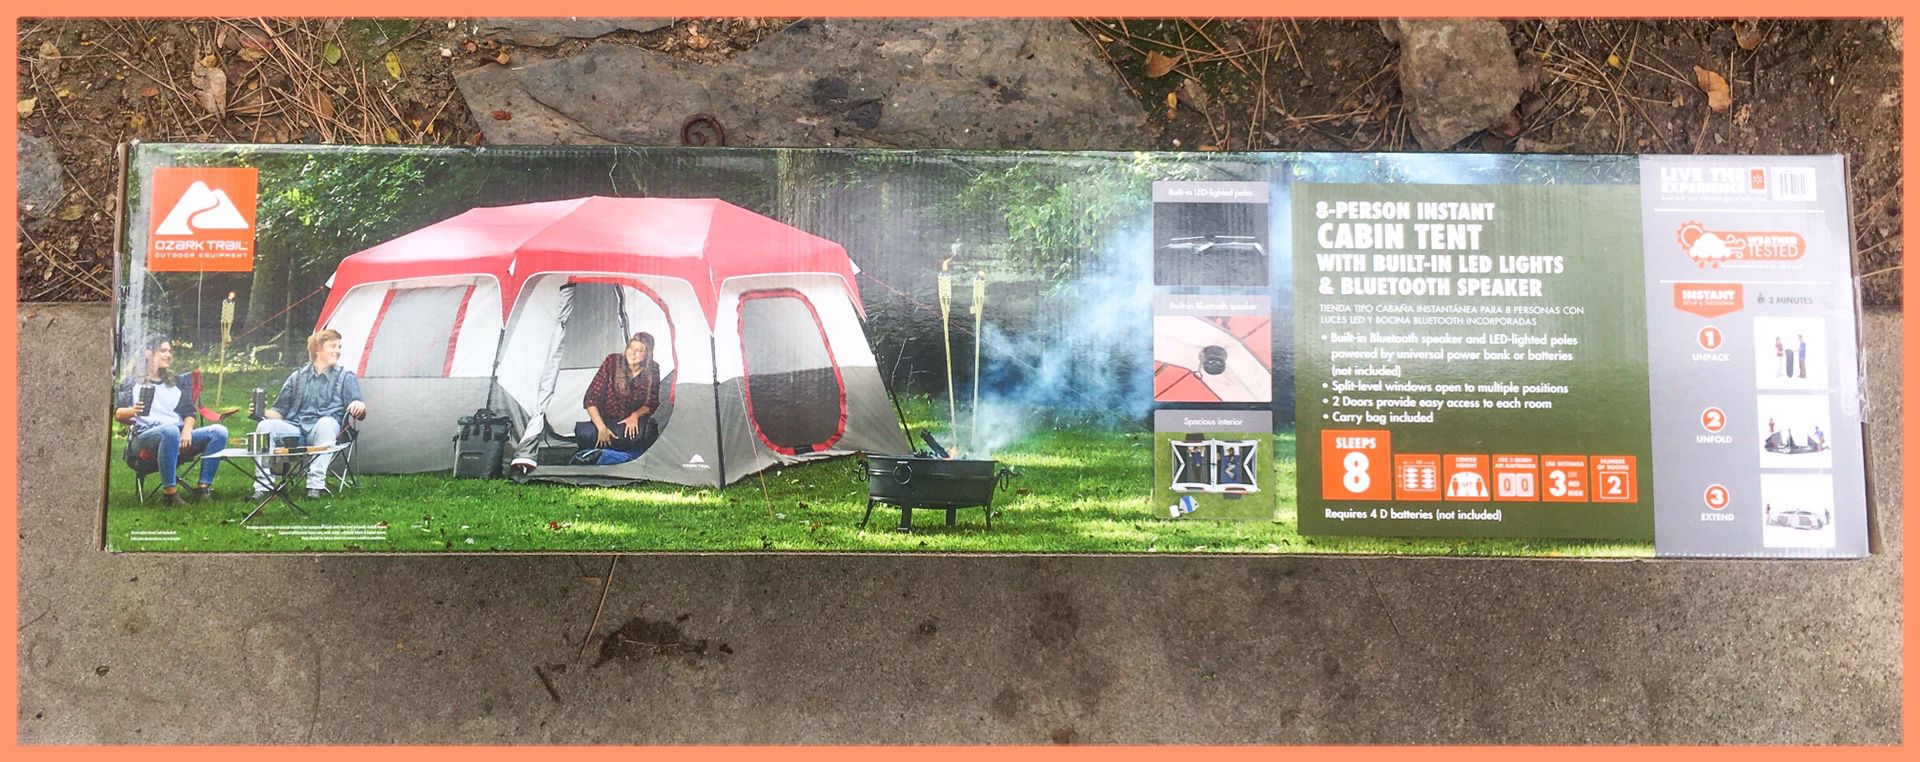 Ozark Trail 8 Person Instant Cabin Tent with LED Lighted Poles and Bluetooth Speaker. Brand New in Box!